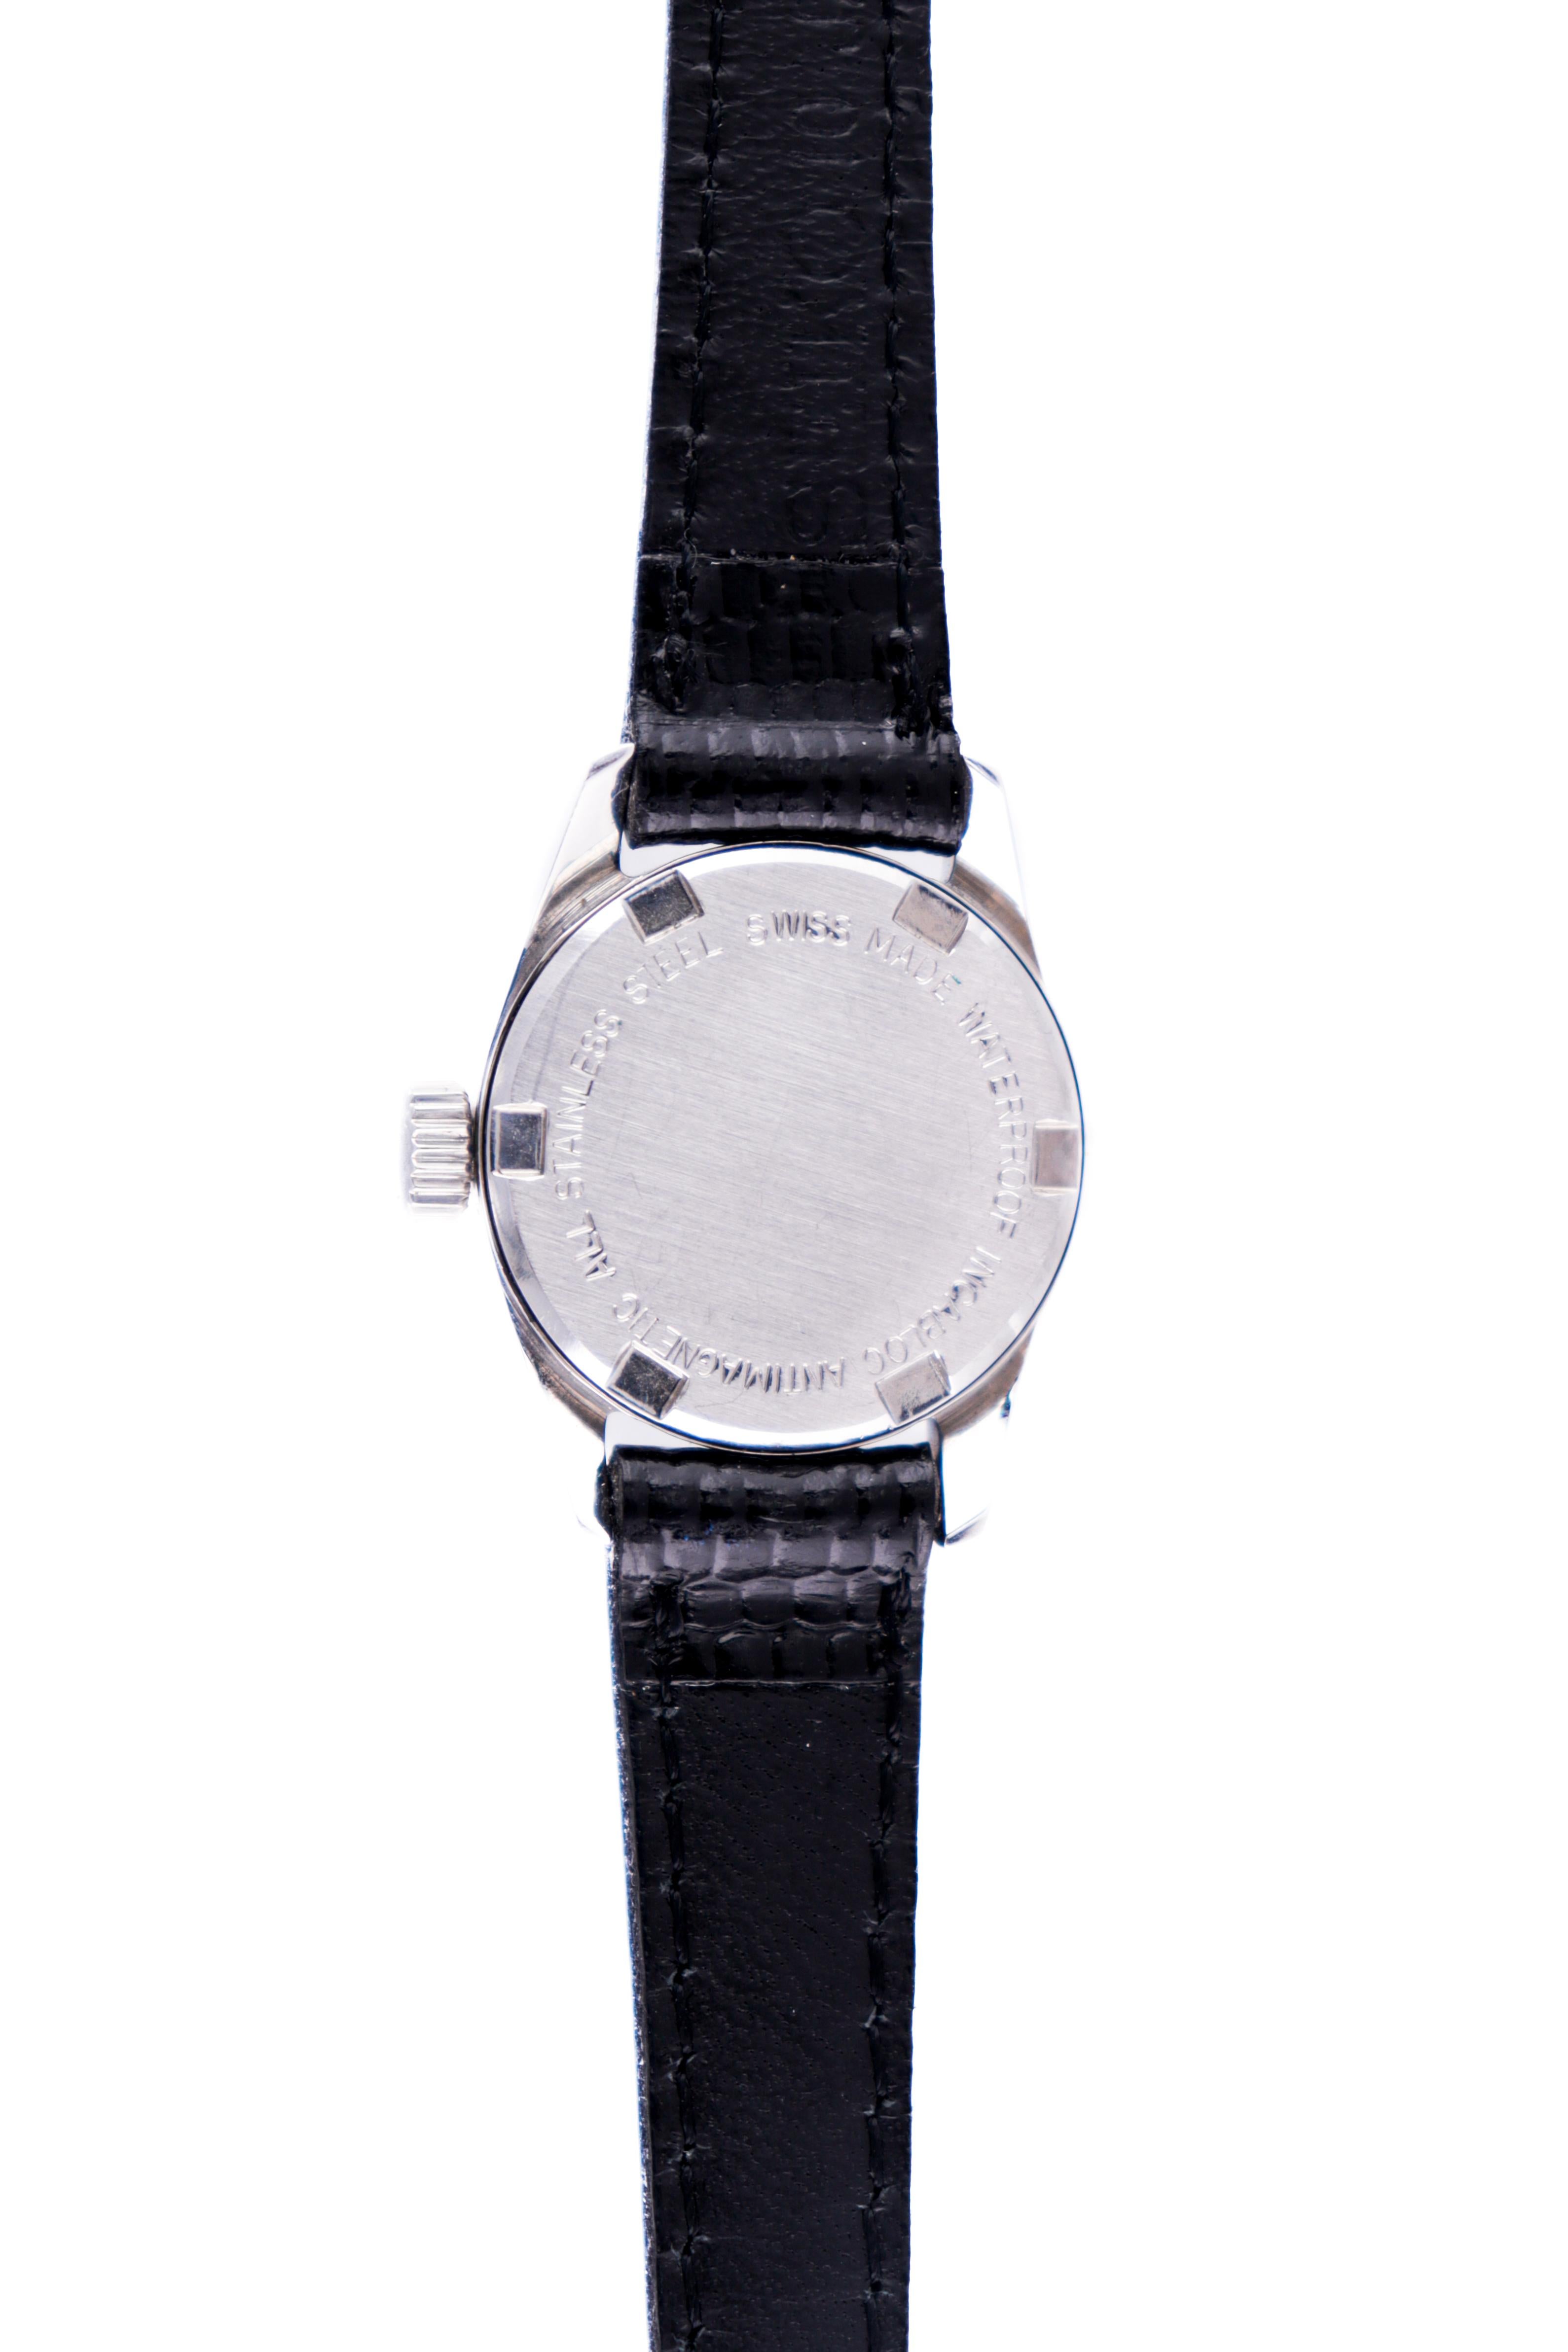 Hebe Stainless Steel New Old Stock Condition Ladies Strap Watch, circa 1960s For Sale 1